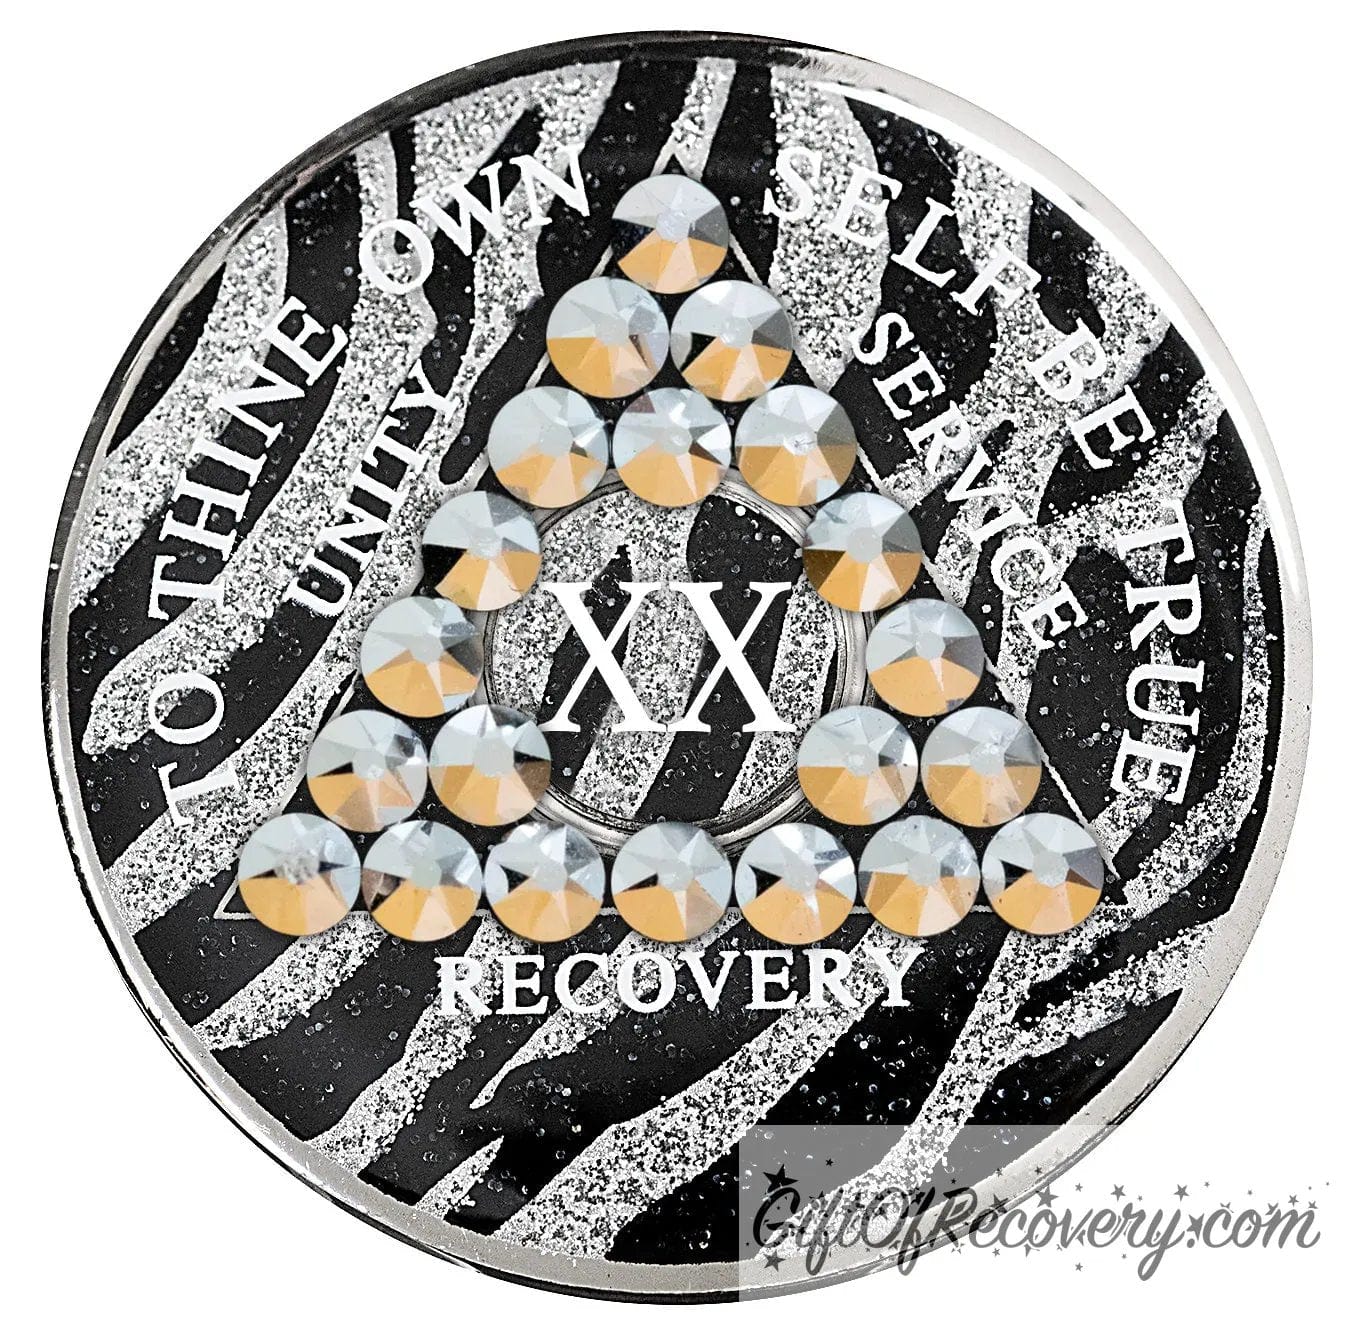 20 Year zebra glitter print, black and silver, AA medallion with 21 genuine comet crystals in a triangle around the year, the lettering unity, service, recovery, the 1 year and To Thine Own Self Be True are in white and the recovery medallion rim is silver.